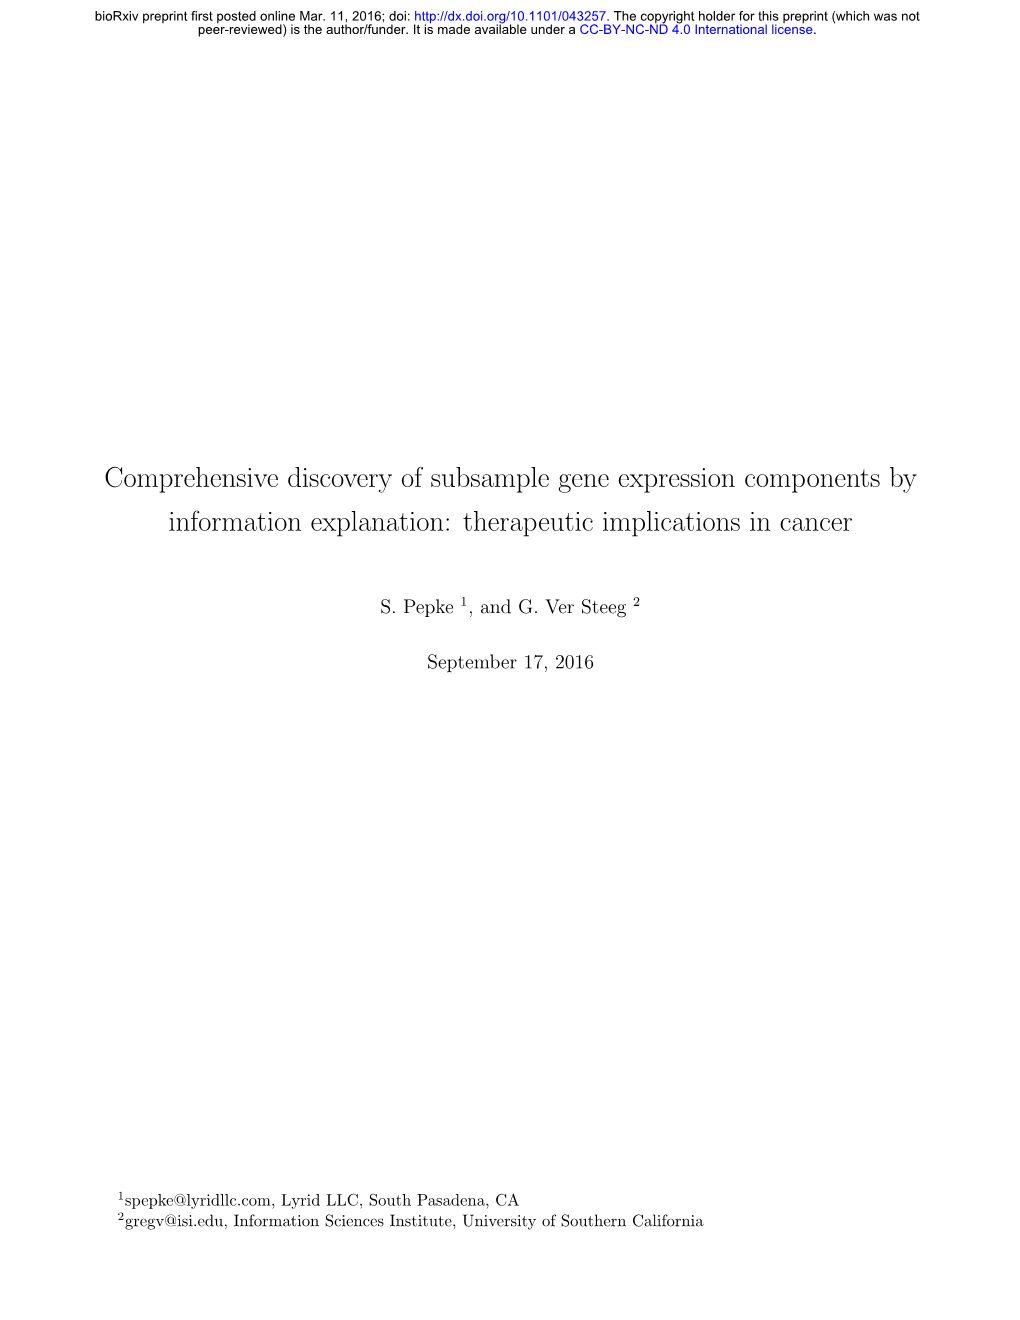 Comprehensive Discovery of Subsample Gene Expression Components by Information Explanation: Therapeutic Implications in Cancer